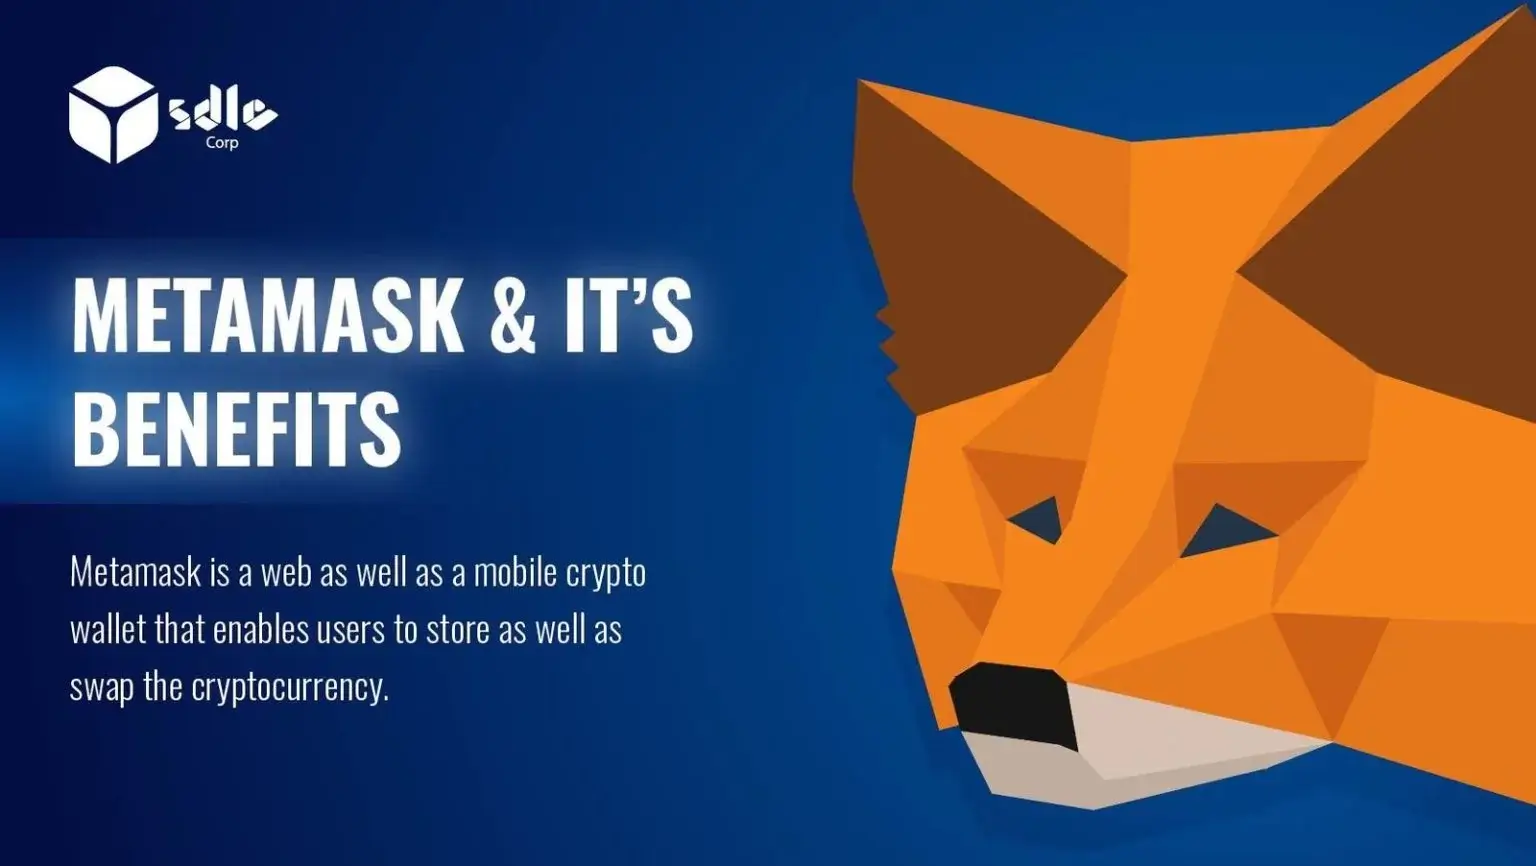 Features of Metamask